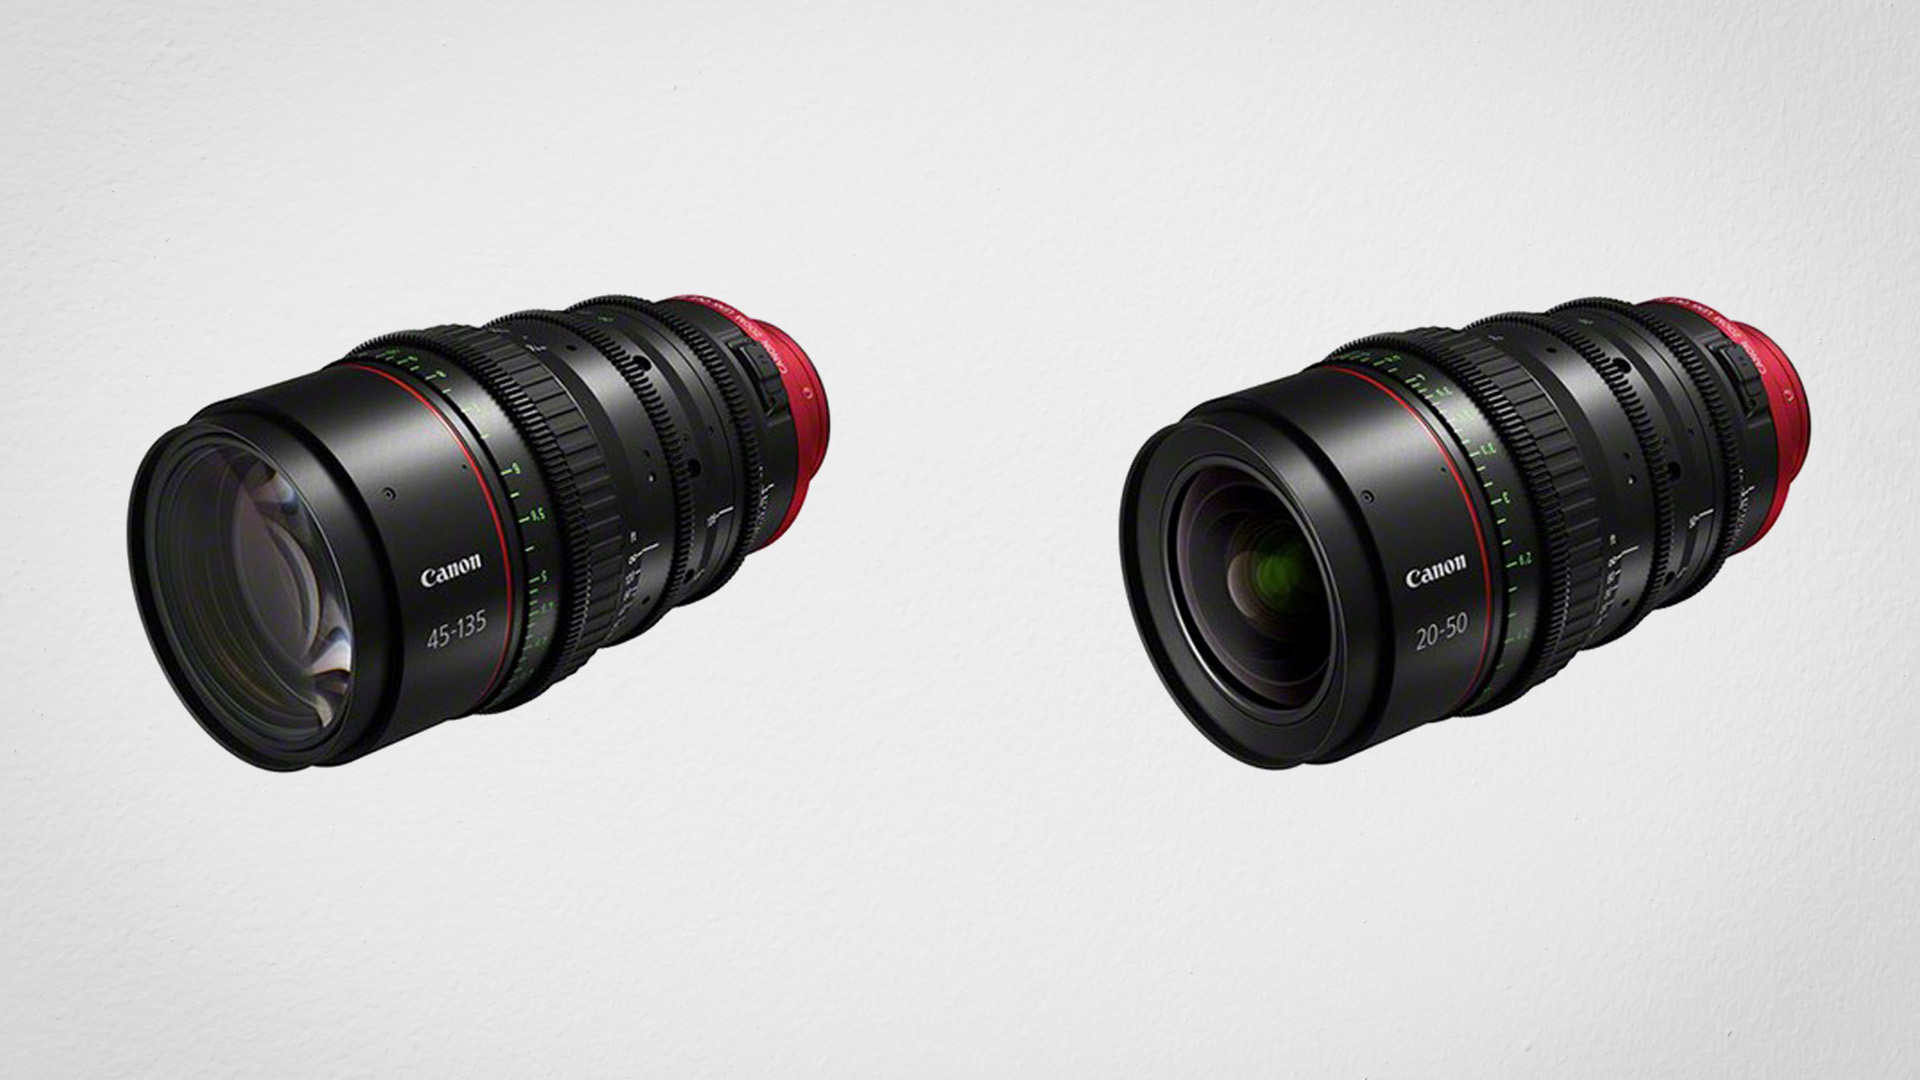 Canon Europe expands cinema offering with its first full frame cine-zoom lenses